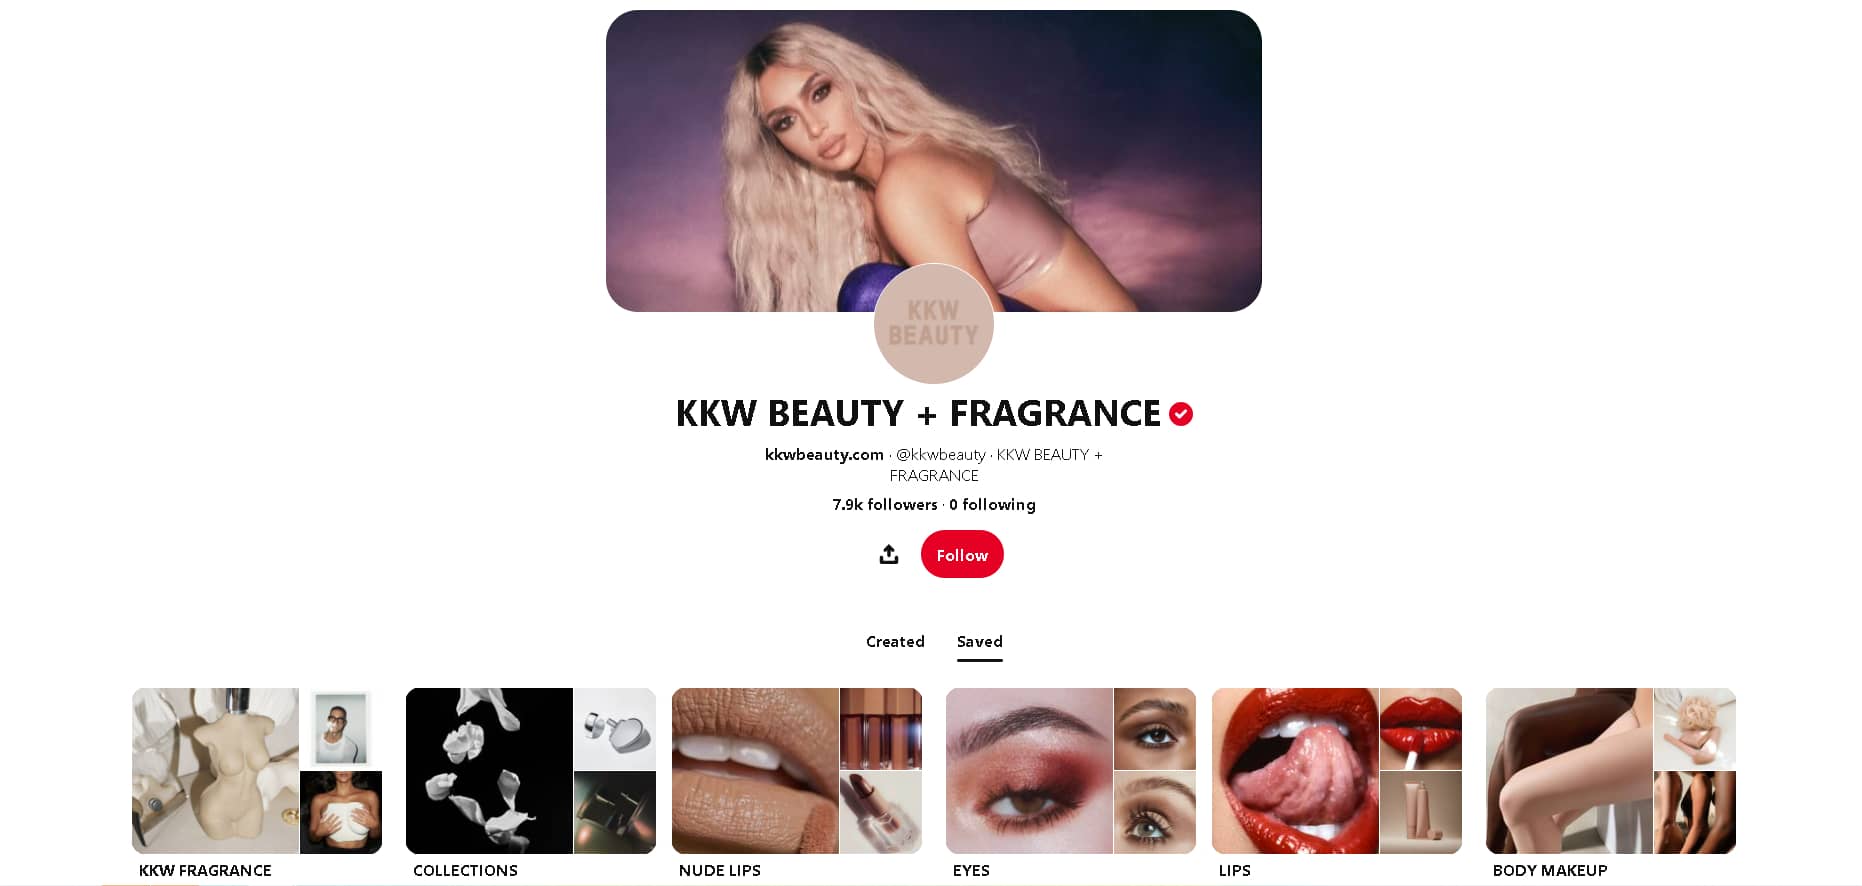 KKW Beauty and Fragrance